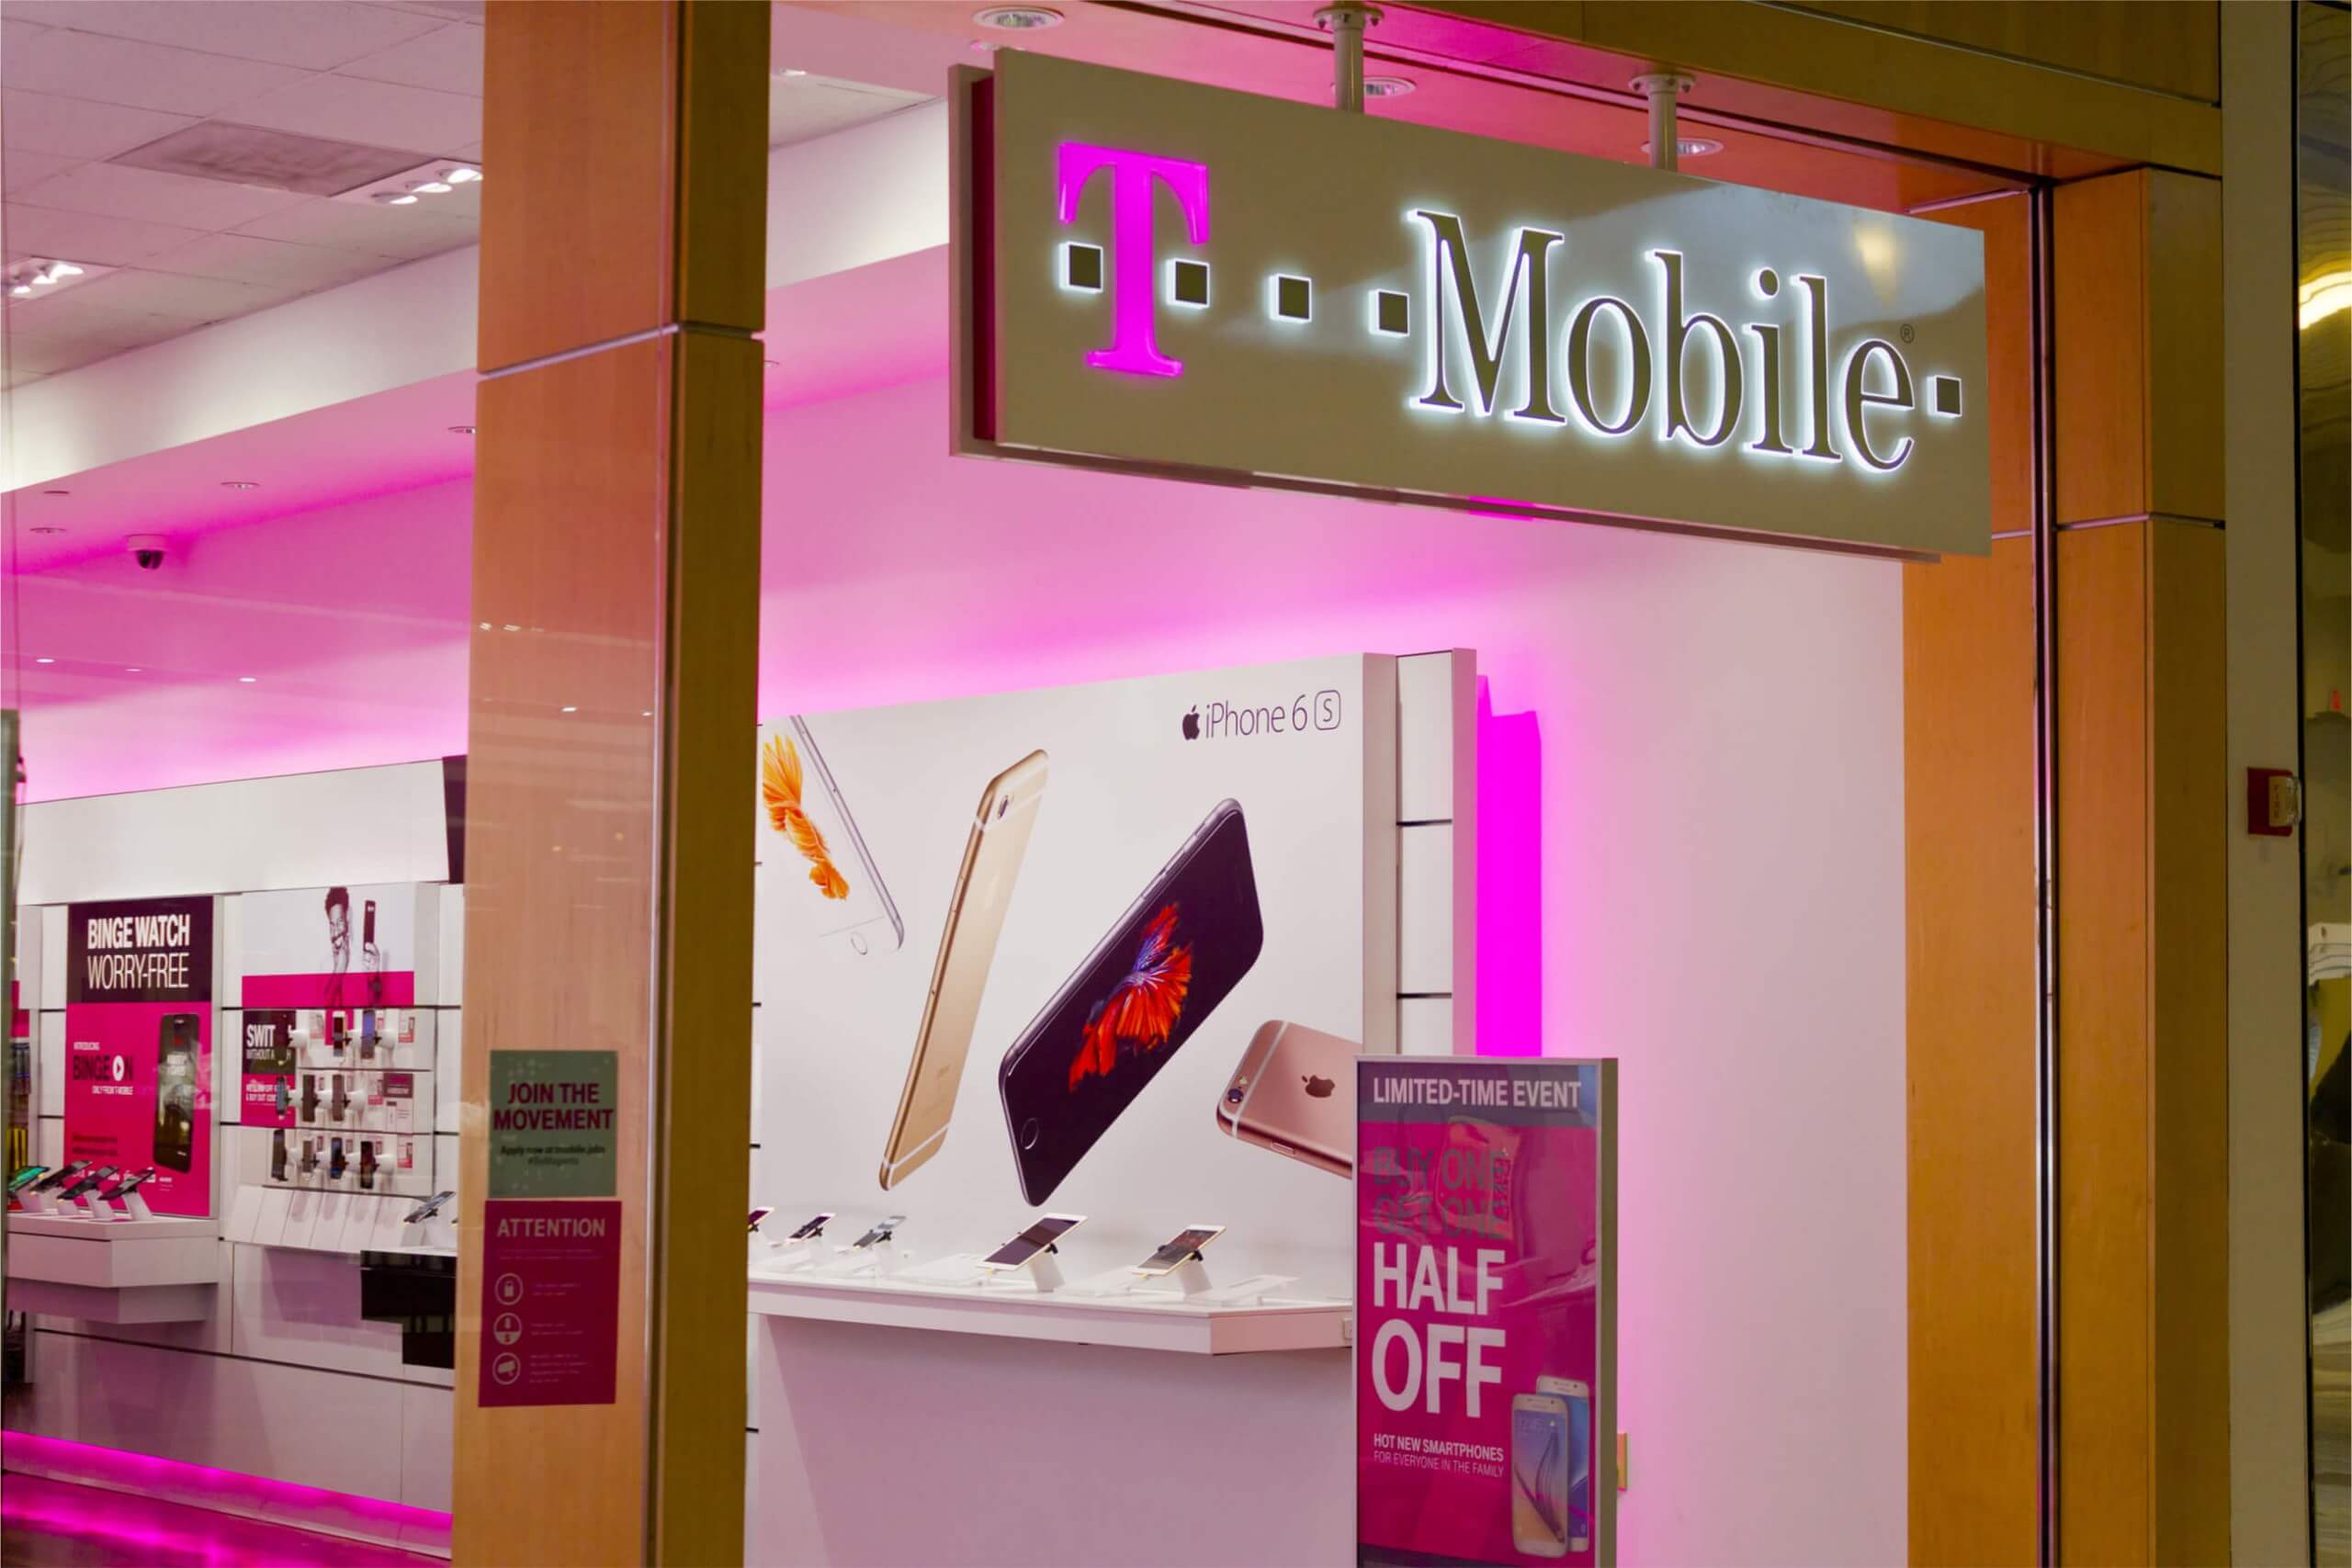 US Justice Department reportedly leaning to deny T-Mobile and Sprint's merger